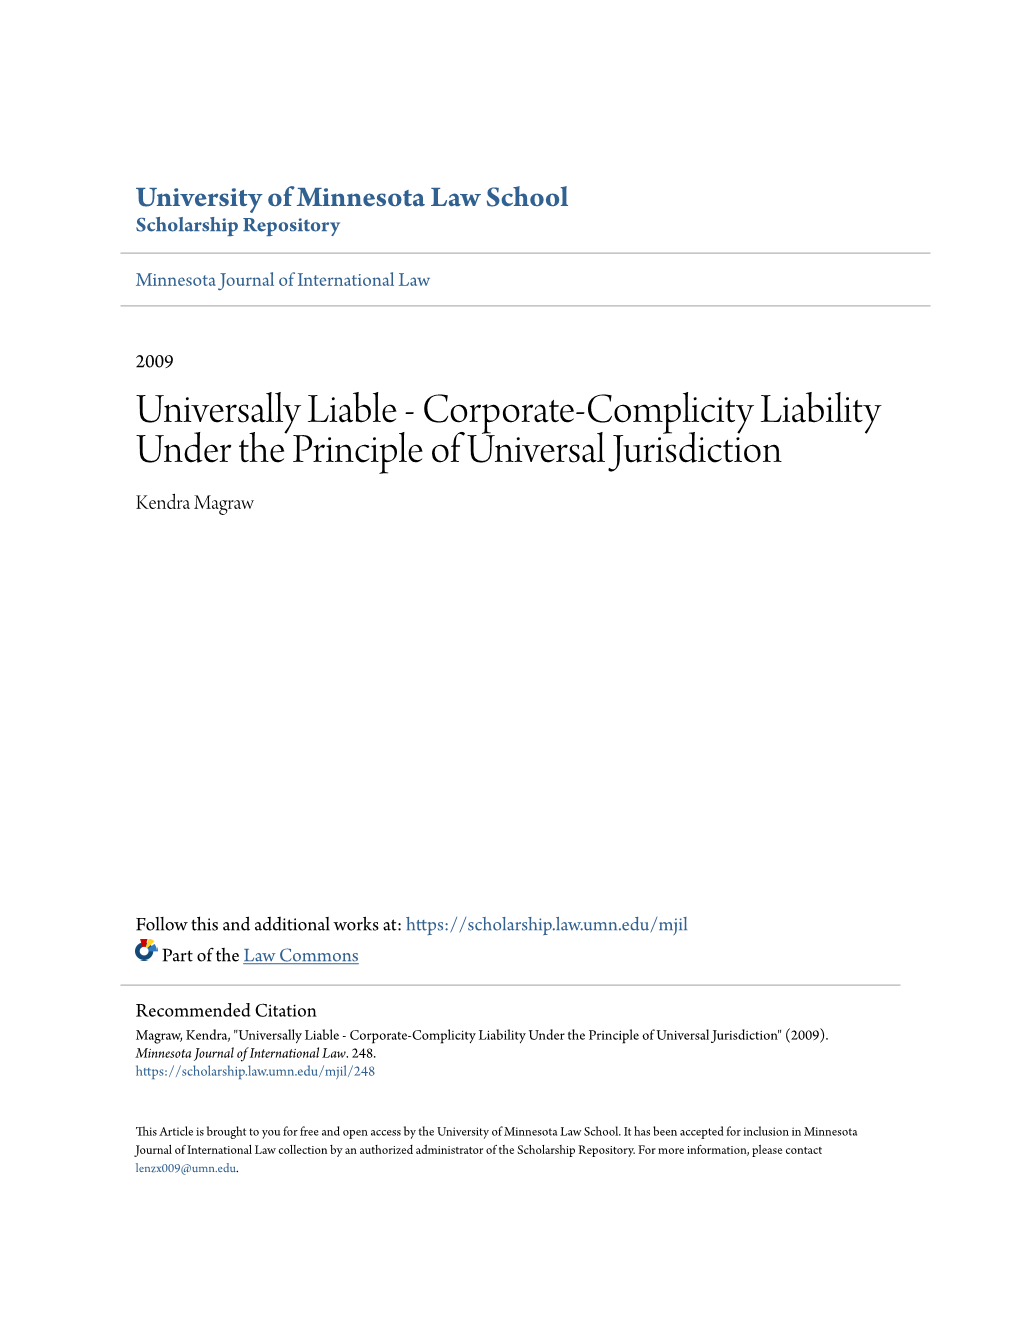 Corporate-Complicity Liability Under the Principle of Universal Jurisdiction Kendra Magraw